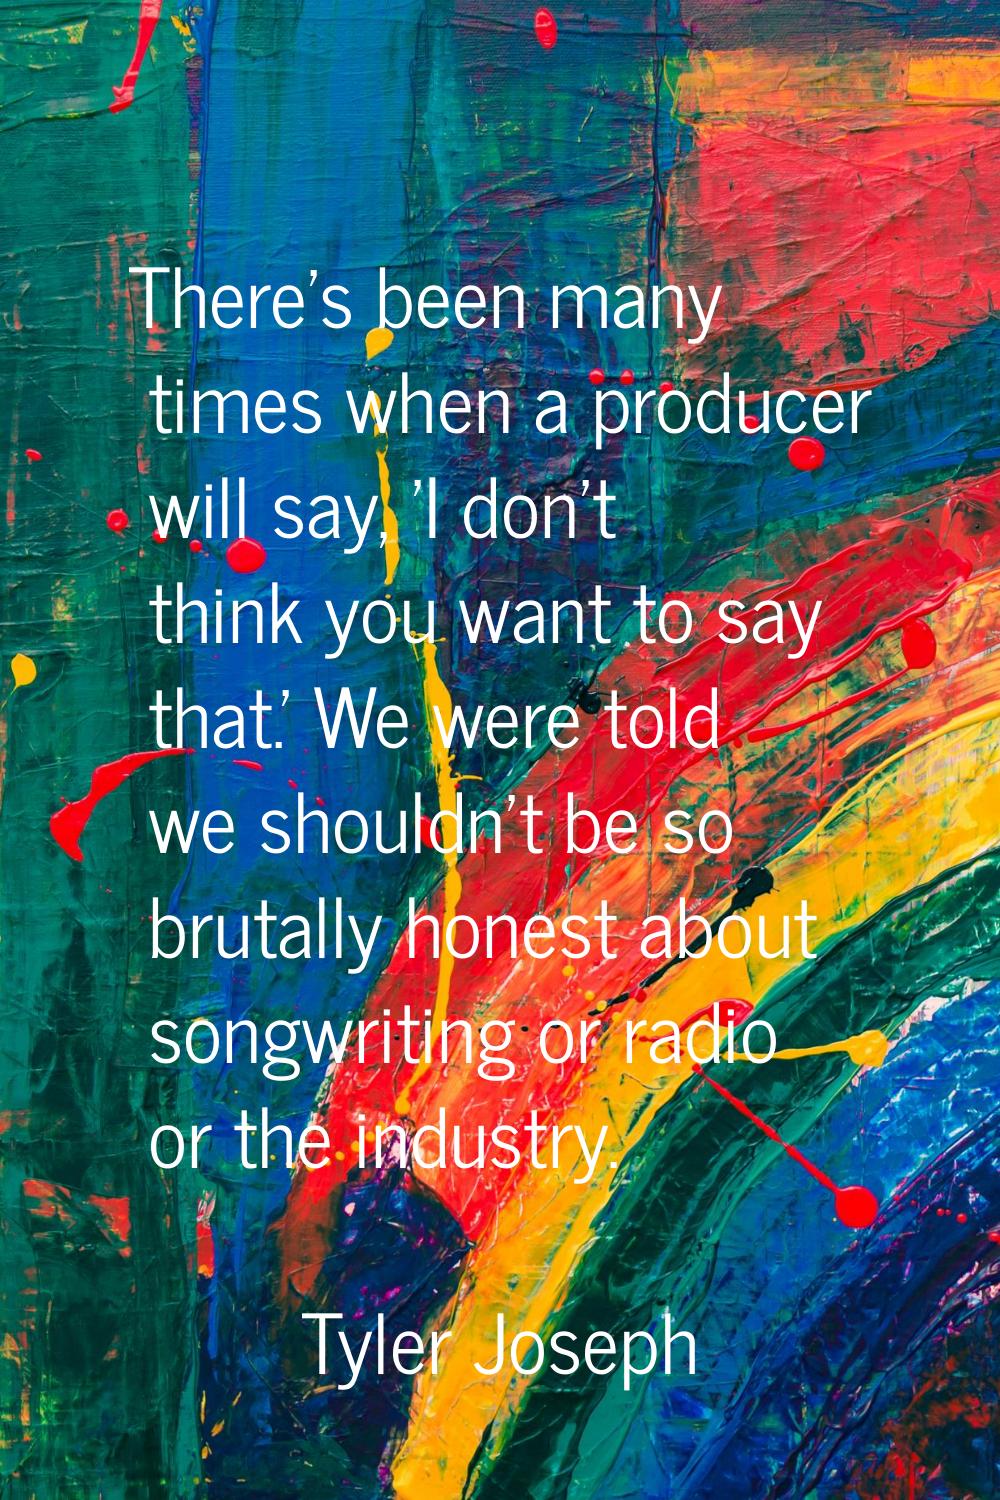 There's been many times when a producer will say, 'I don't think you want to say that.' We were tol